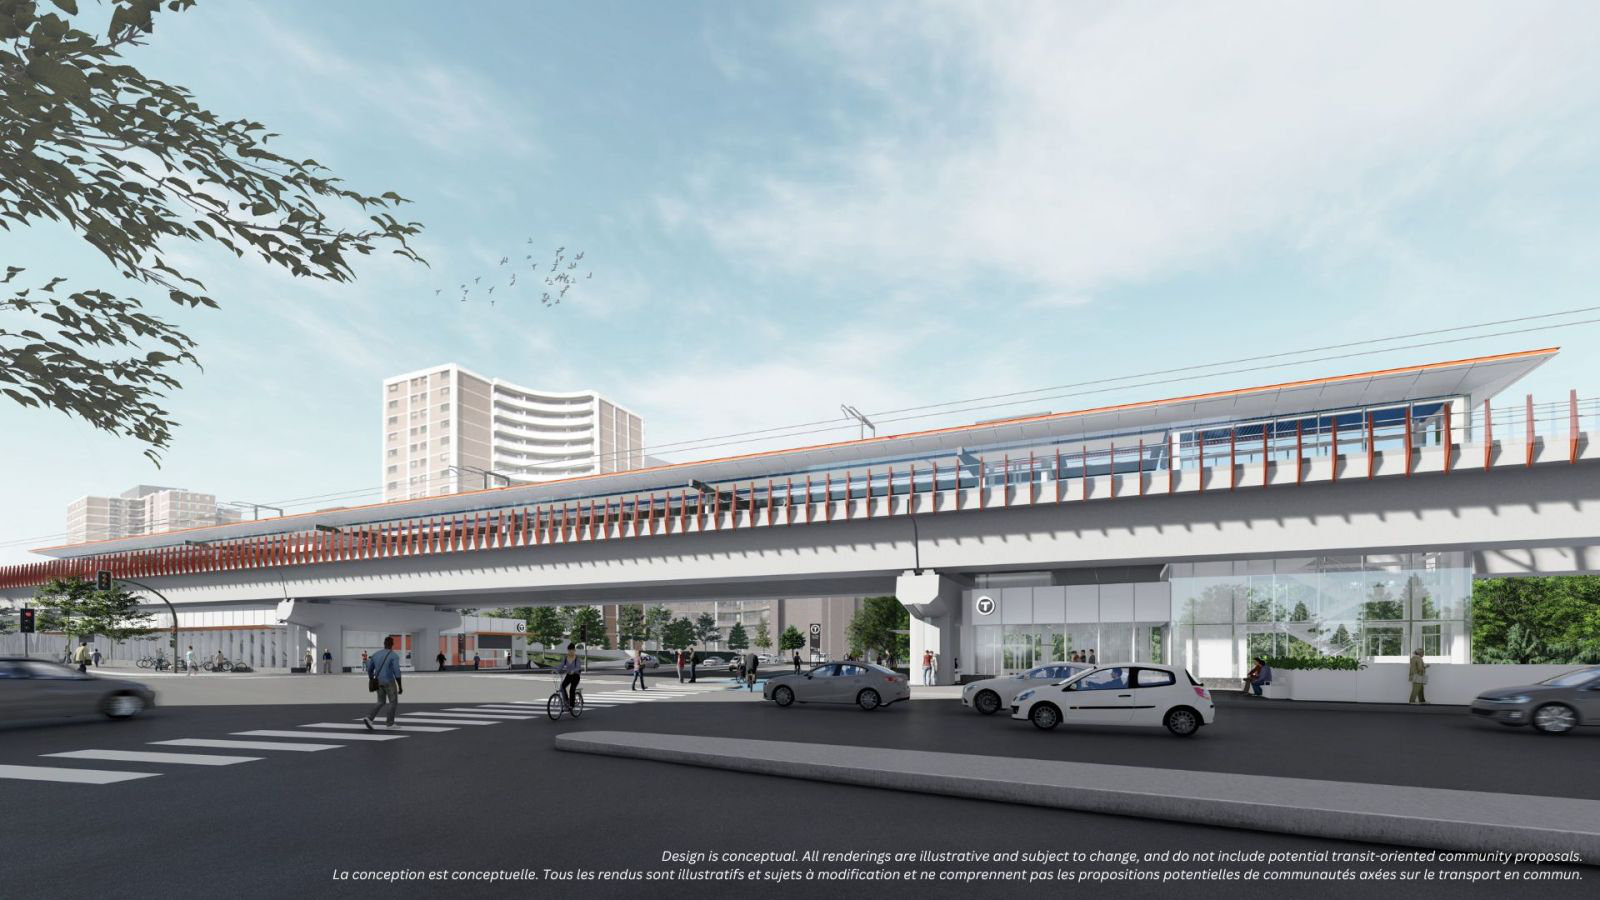 Street-level view of entrances and elevated platform at the future Scarlett Station